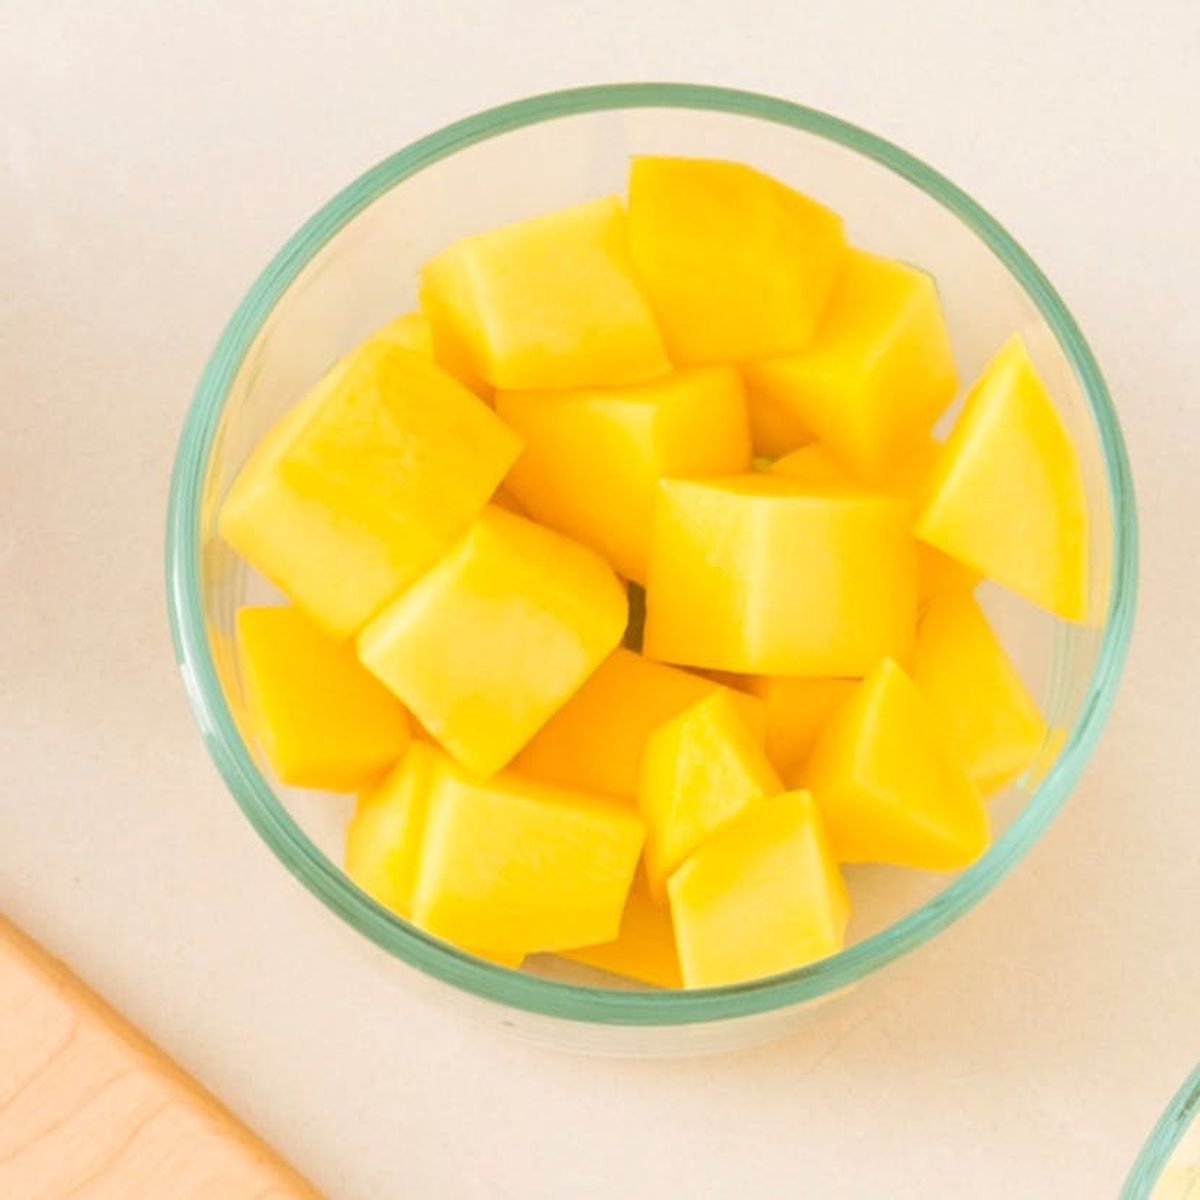 I Tried Alton Brown’s Method for Cutting Mango, and It’s Pure Genius